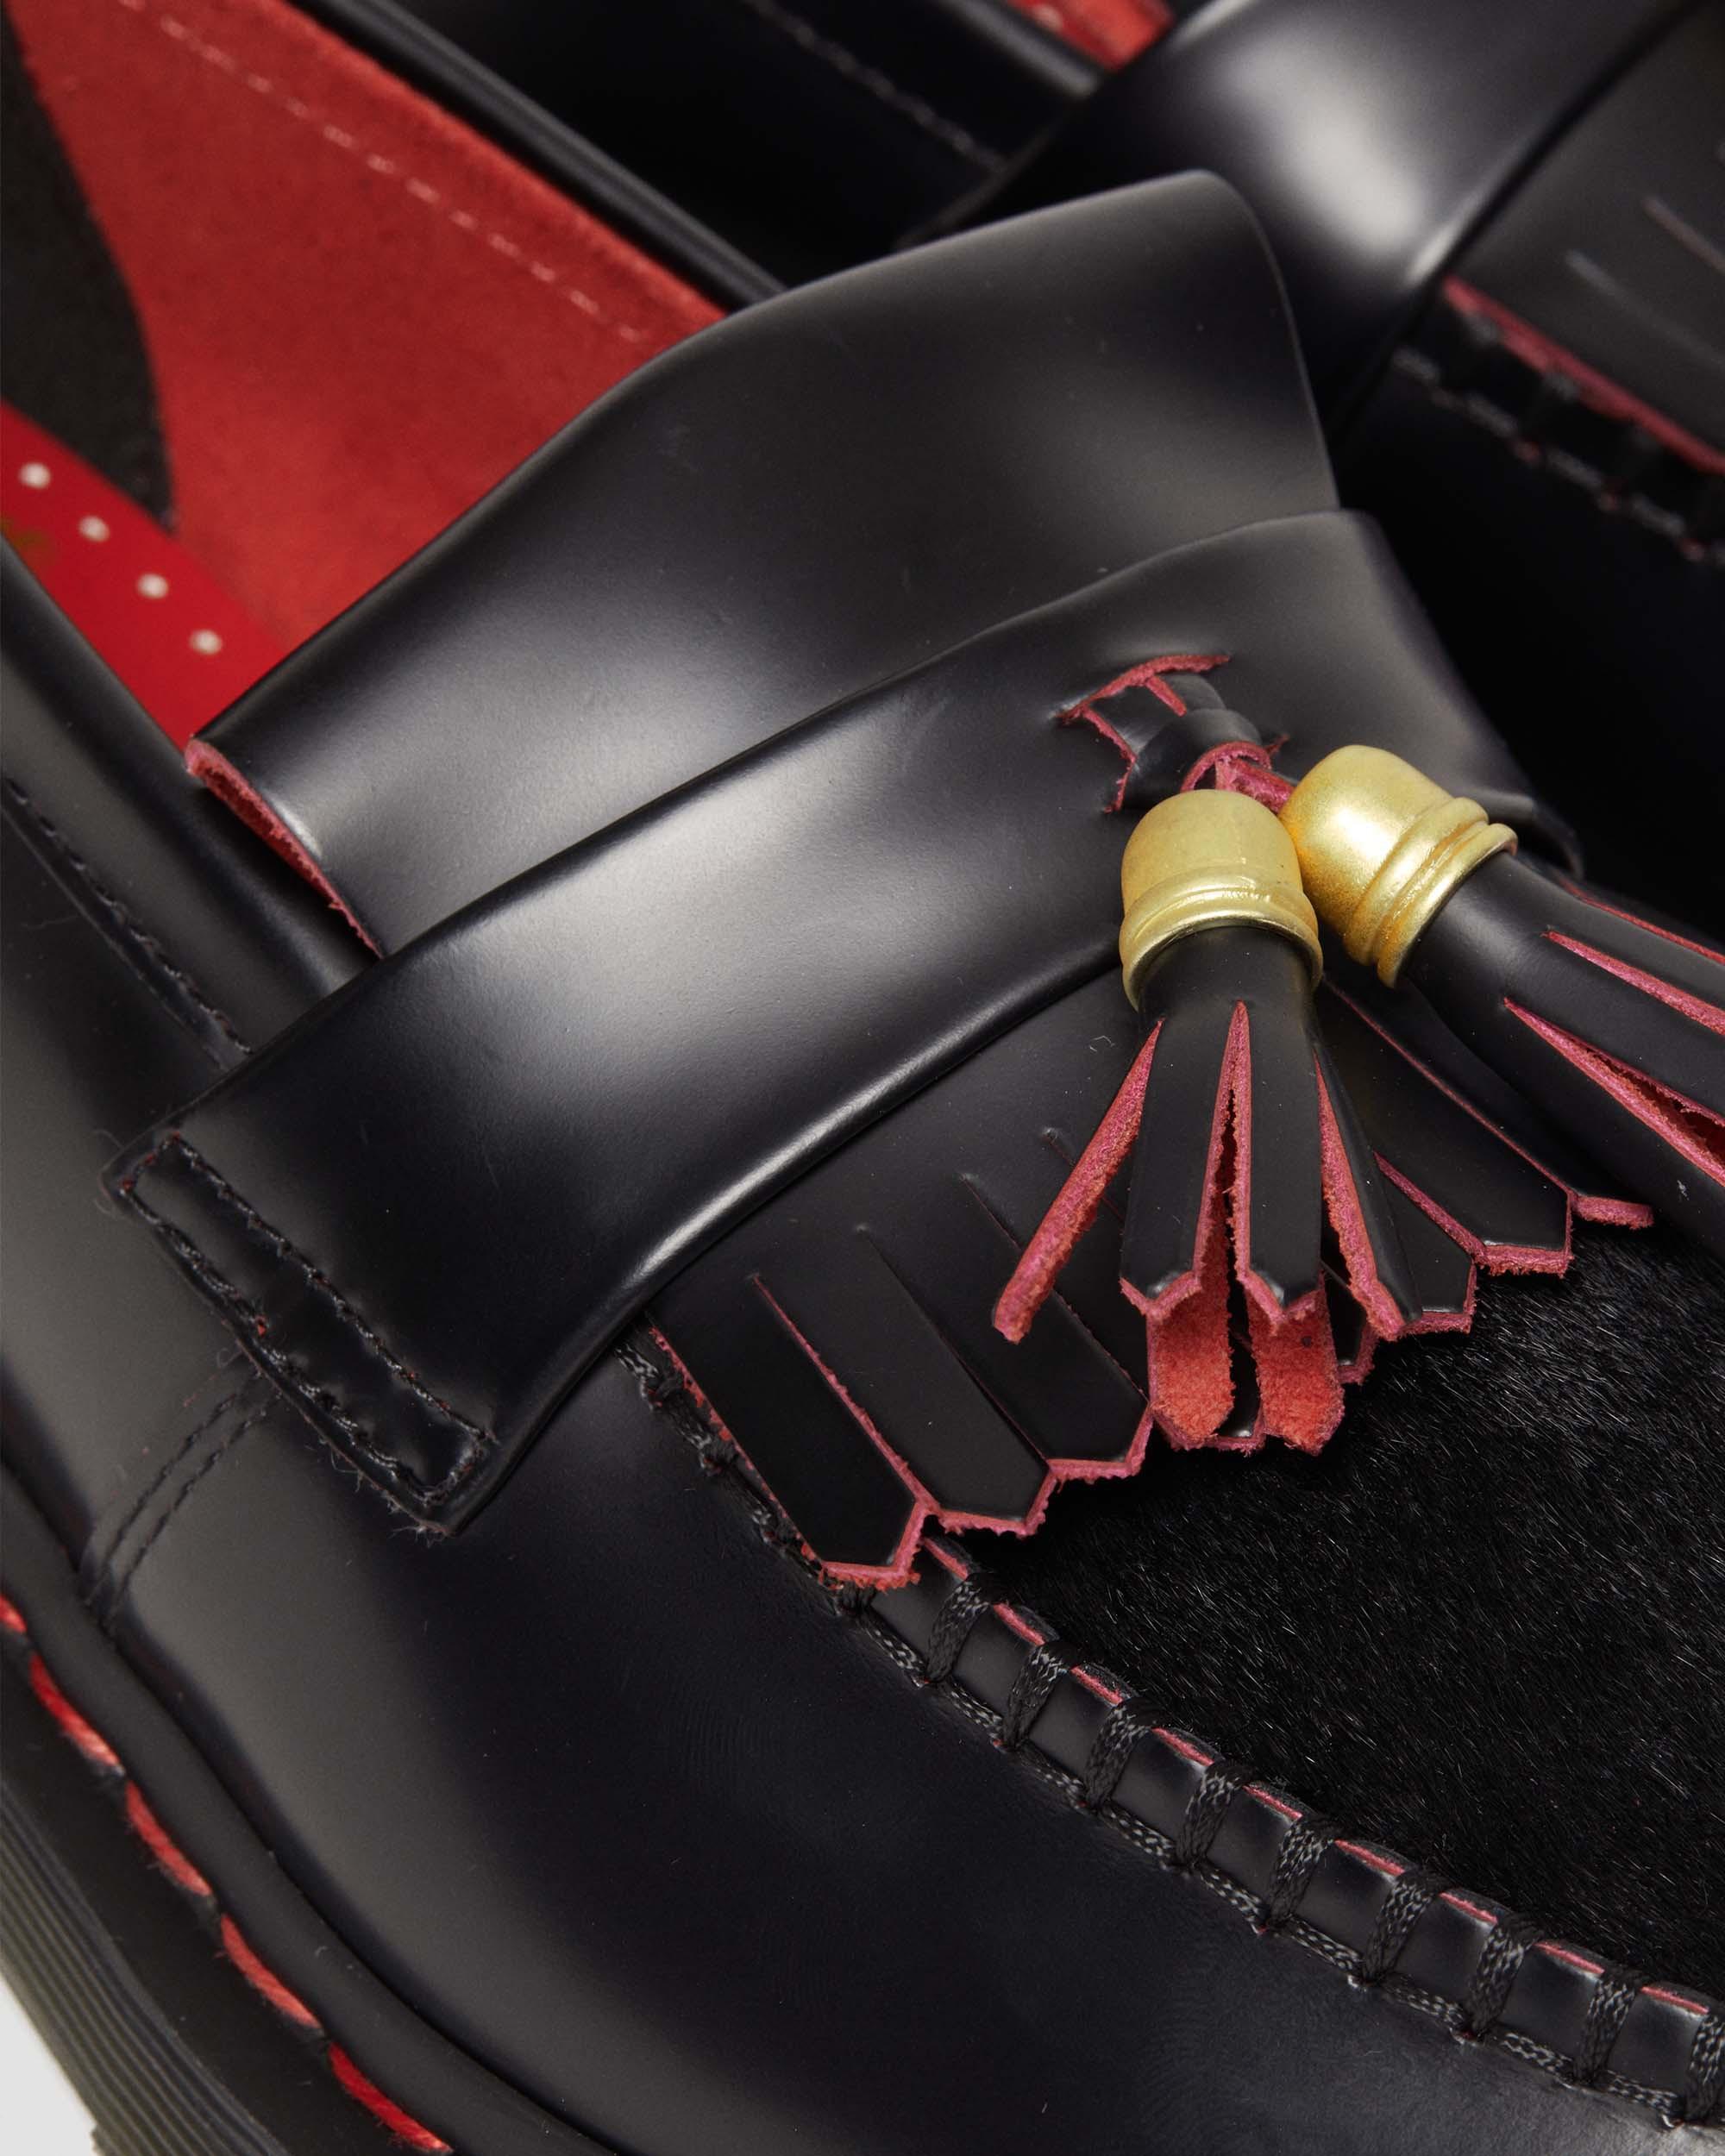 Adrian Year of the Dragon Hair-On Tassel Loafers in Black+Red+Black